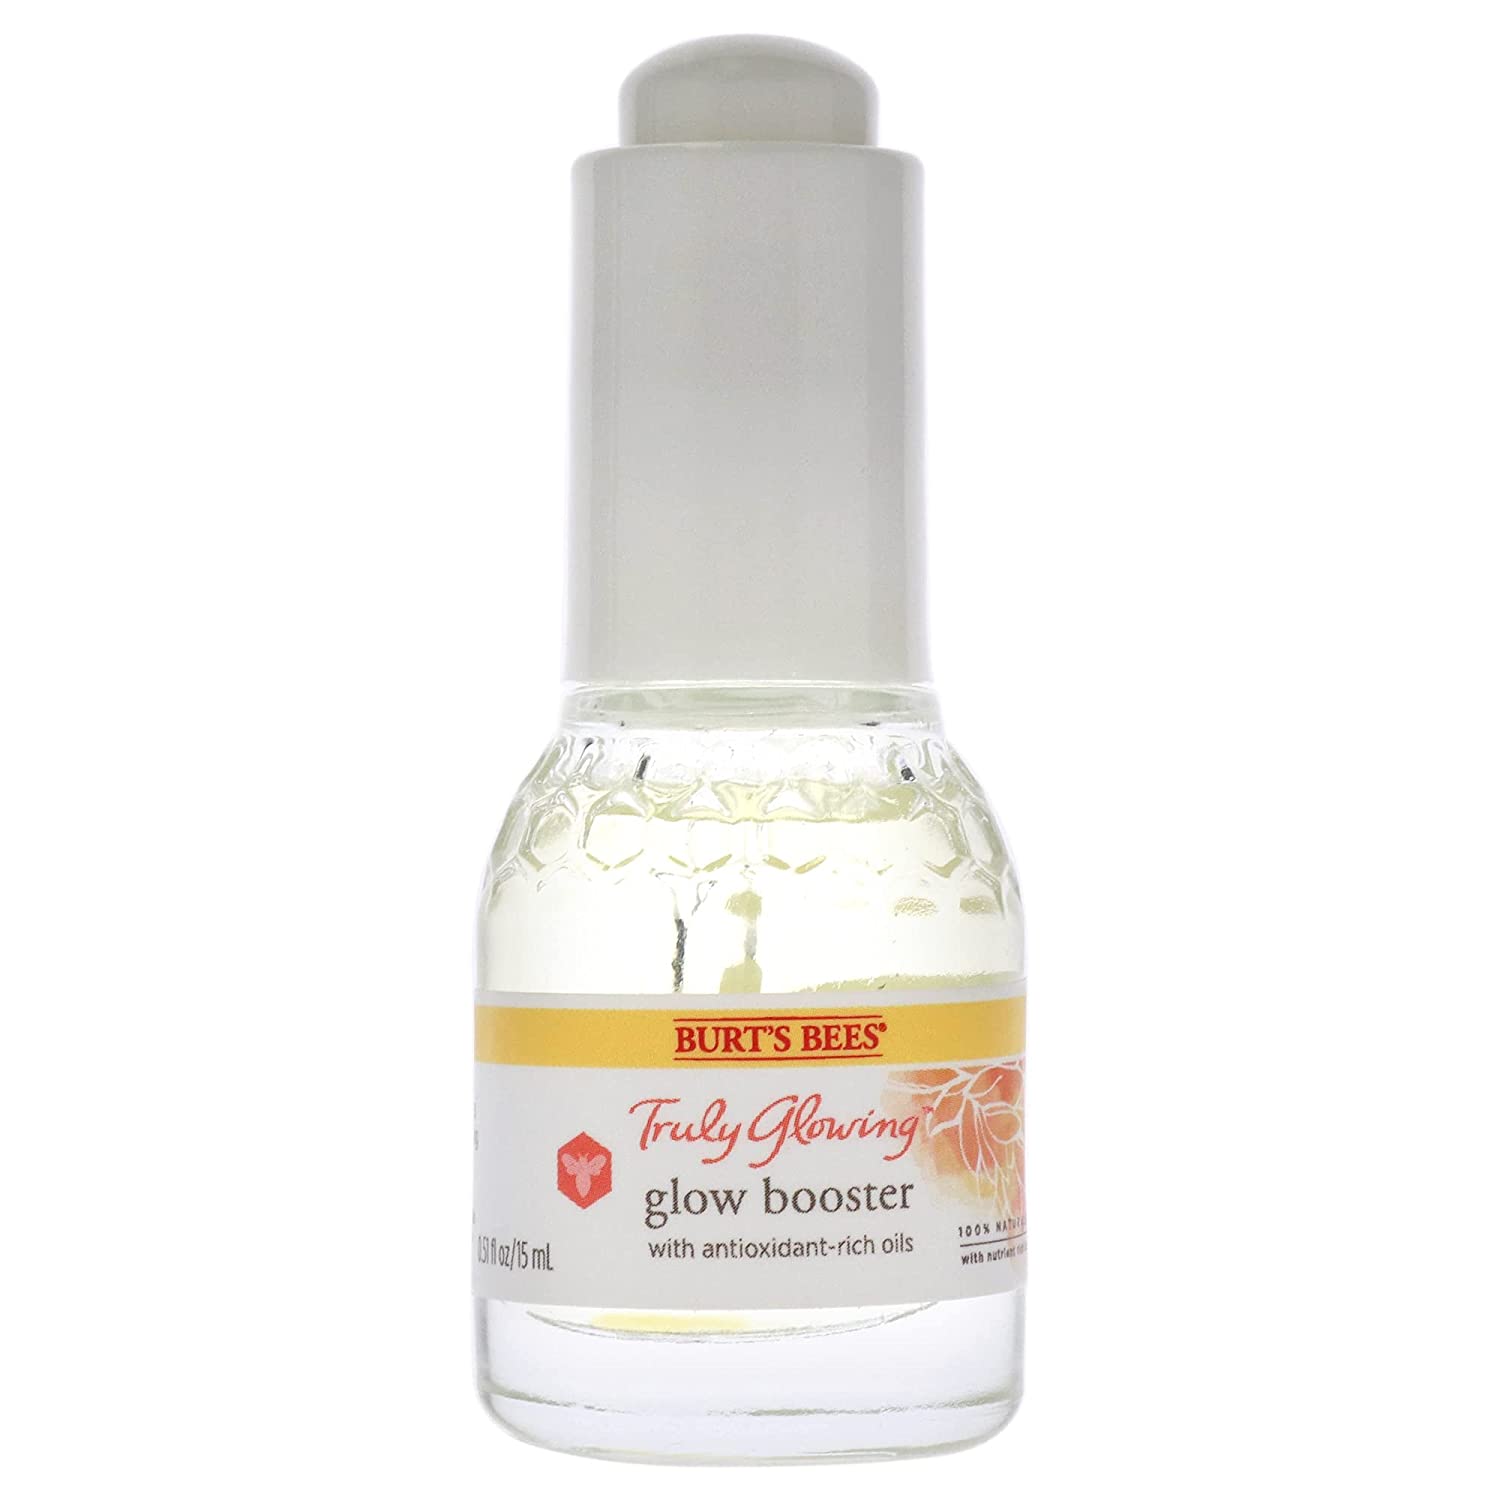 Burt's Bees Glow Booster Face Serum with Antioxidant-Rich Oils for Normal and Combination Skin, 0.51 oz